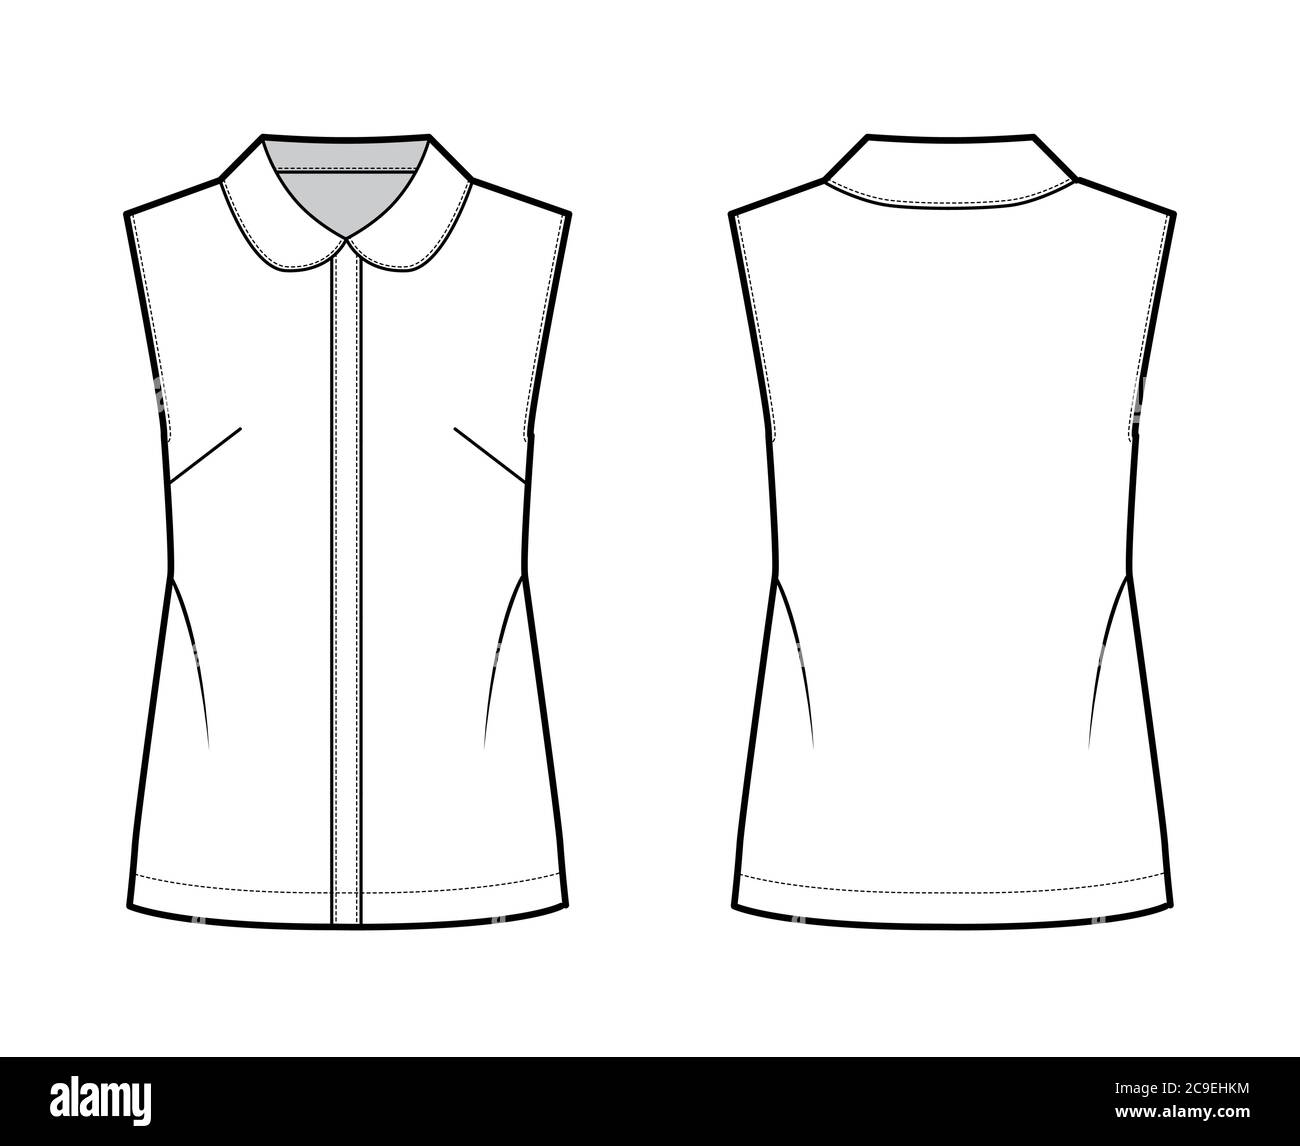 Blouse technical fashion illustration with round collar, sleeveless, loose silhouette, front button fastenings. Flat shirt apparel template front, back white color. Women, men unisex top CAD mockup Stock Vector